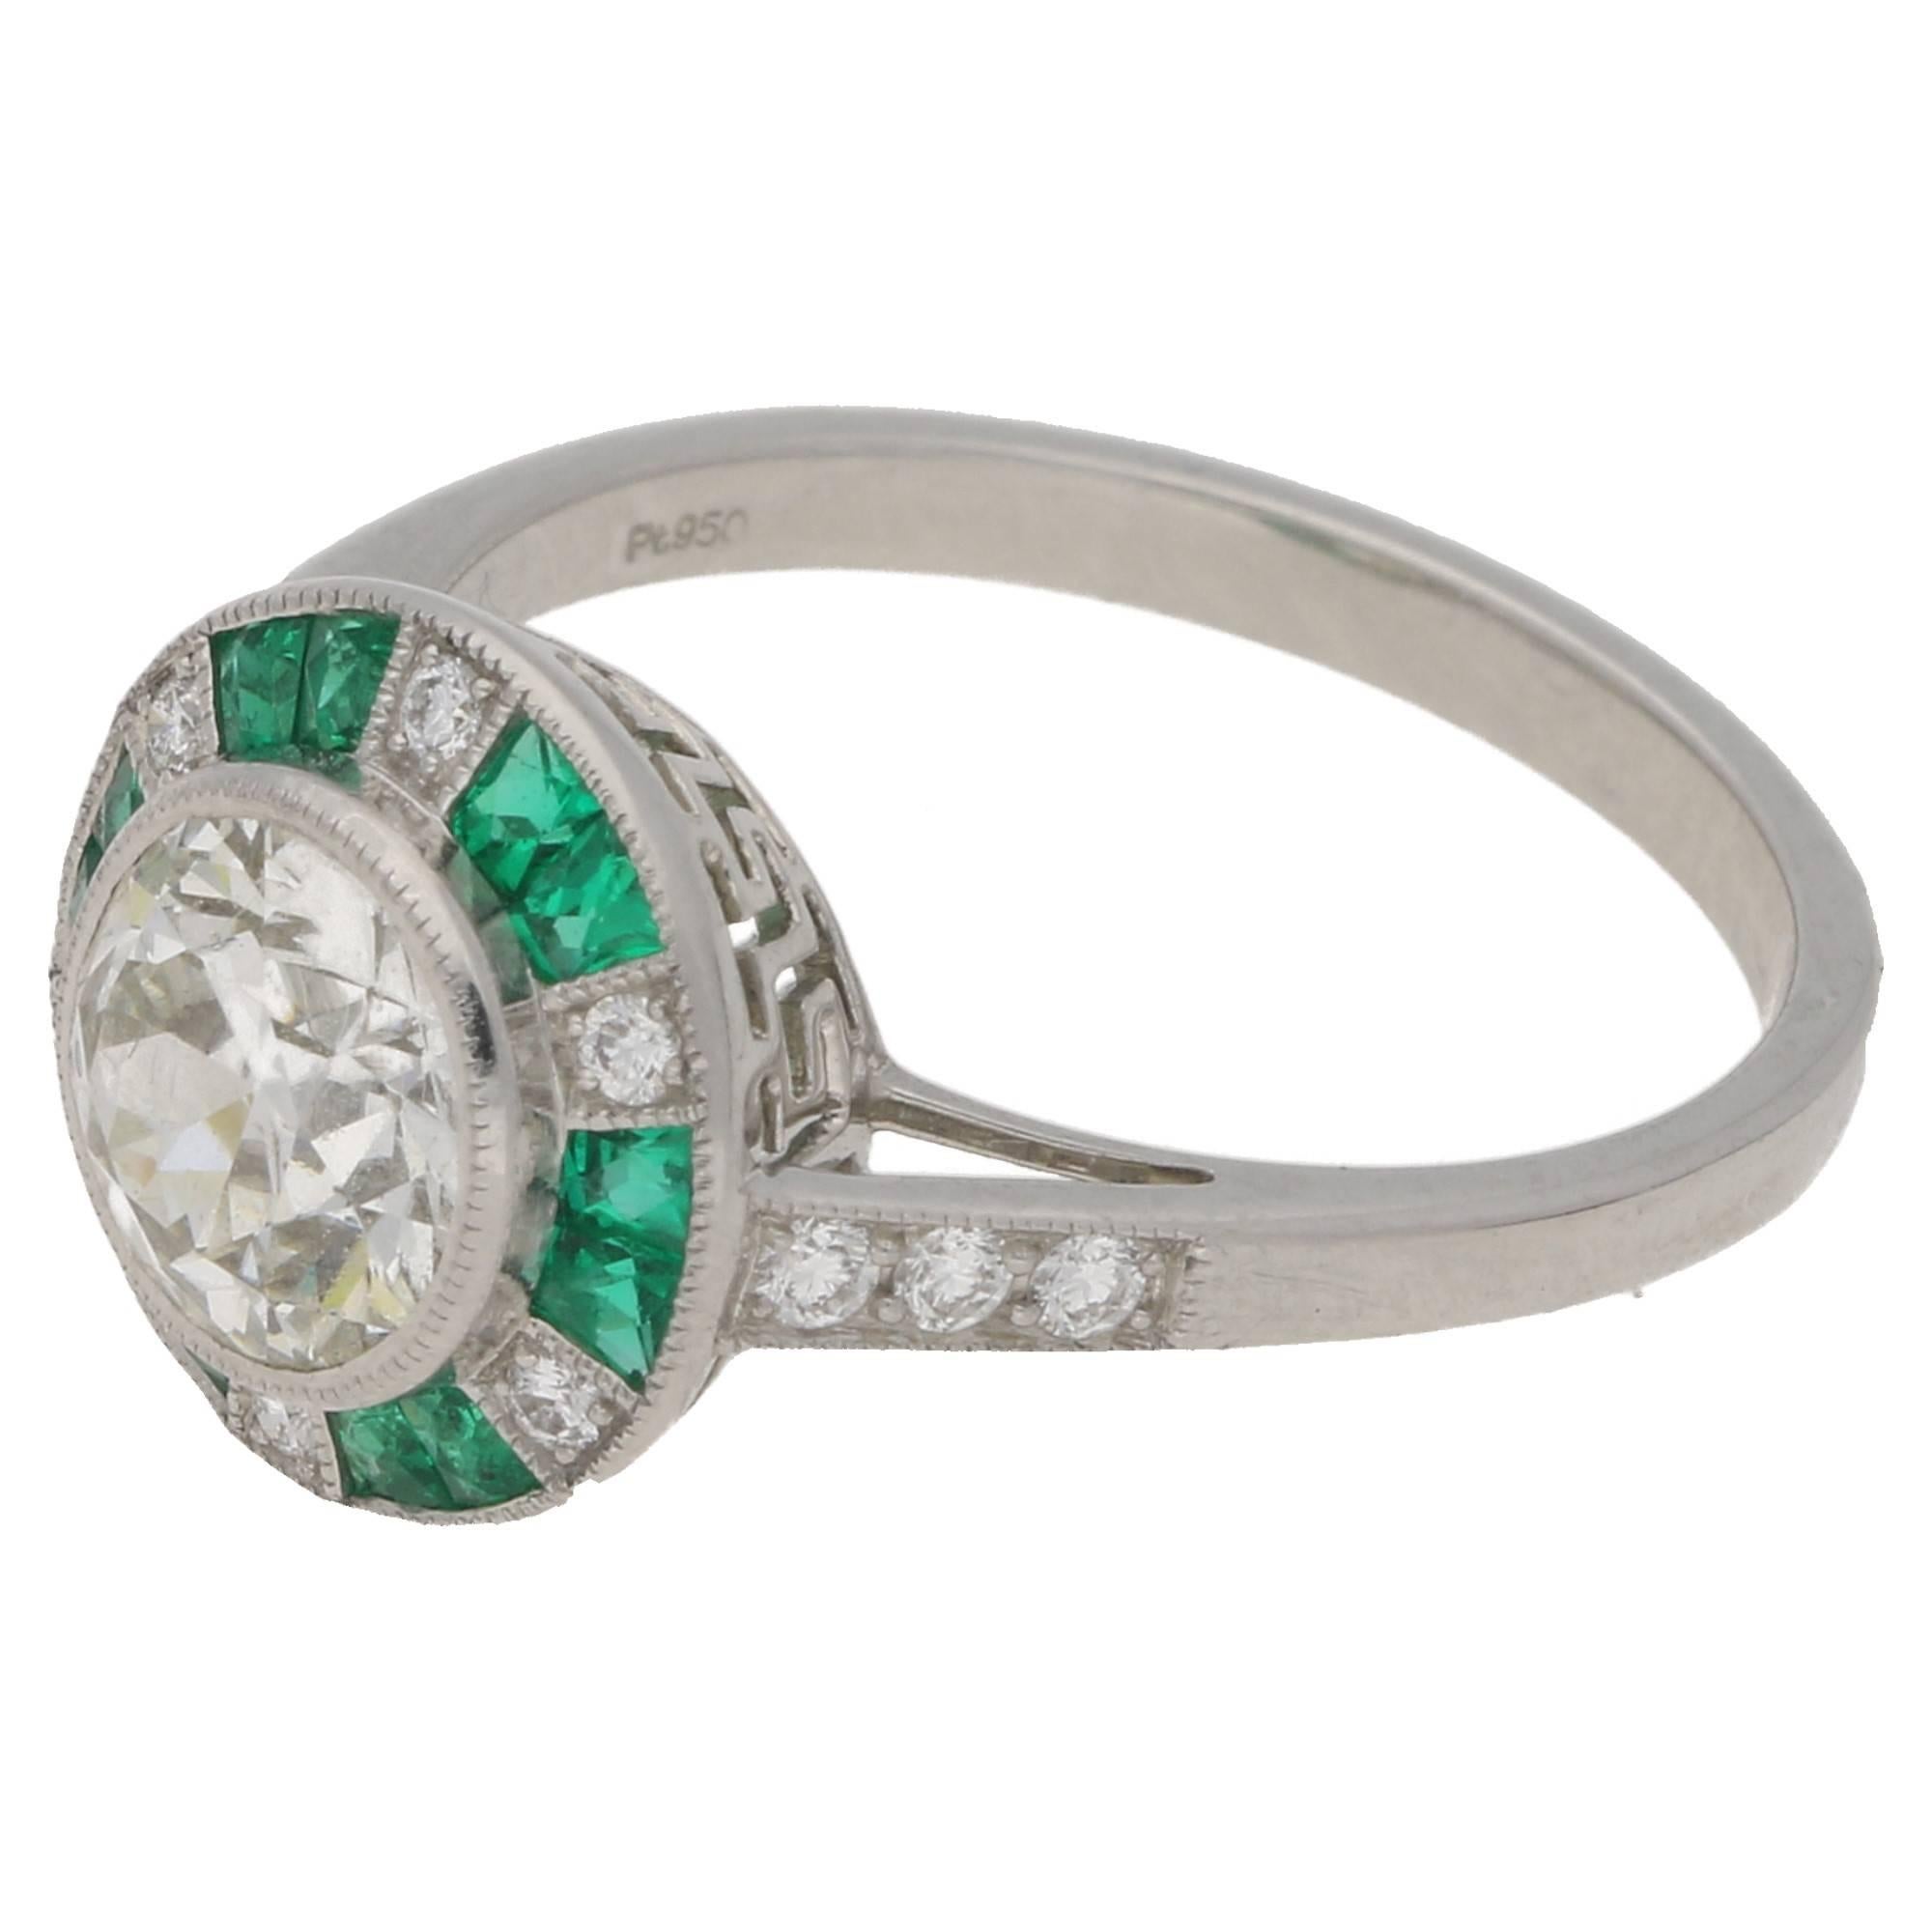 A beautiful emerald and diamond cluster engagement ring in platinum. The ring is formed of an old European cut diamond rubover set to the centre with a millegrain finish. The centre diamond is surrounded by a halo of calibre cut emeralds and round